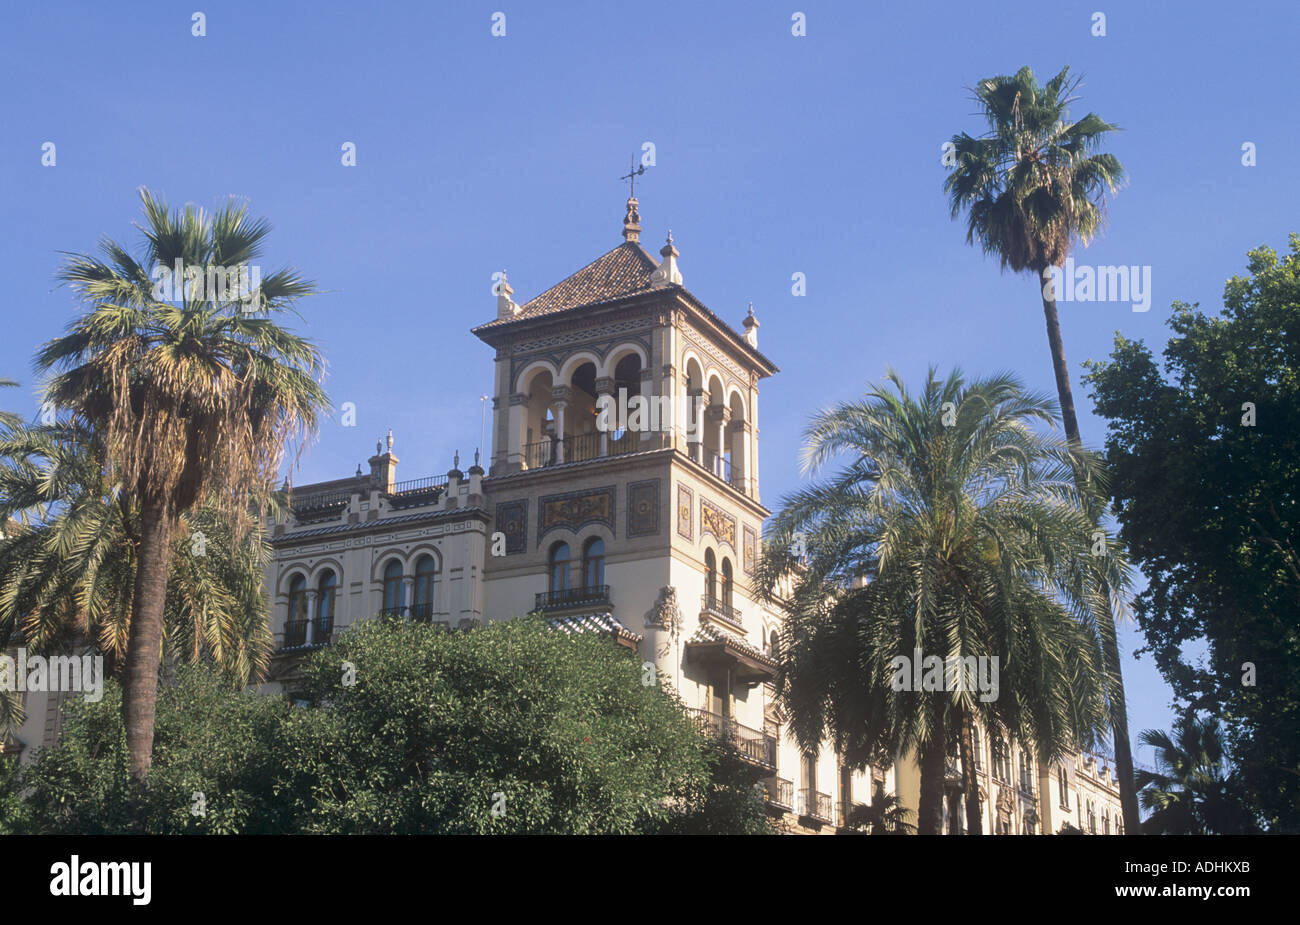 Alfonso XIII Hotel Seville Spain Stock Photo